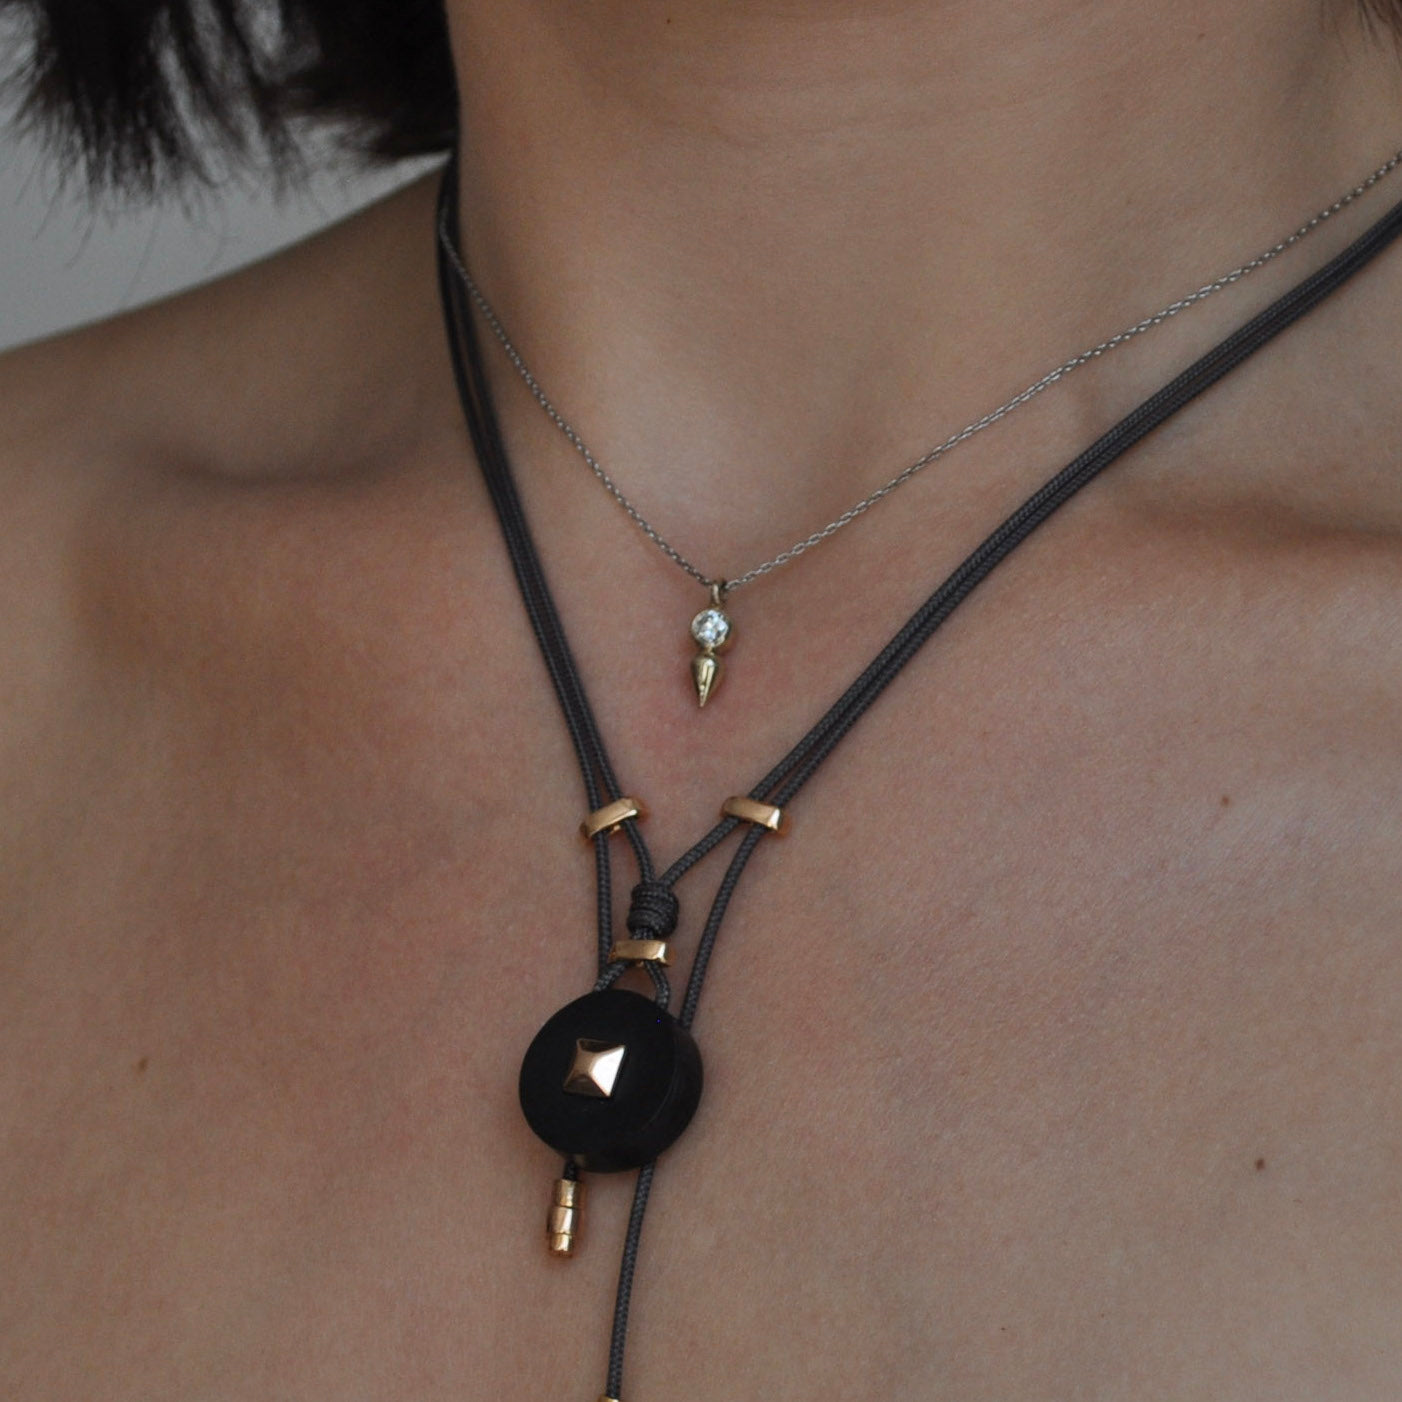 Coco horn pendant rose gold